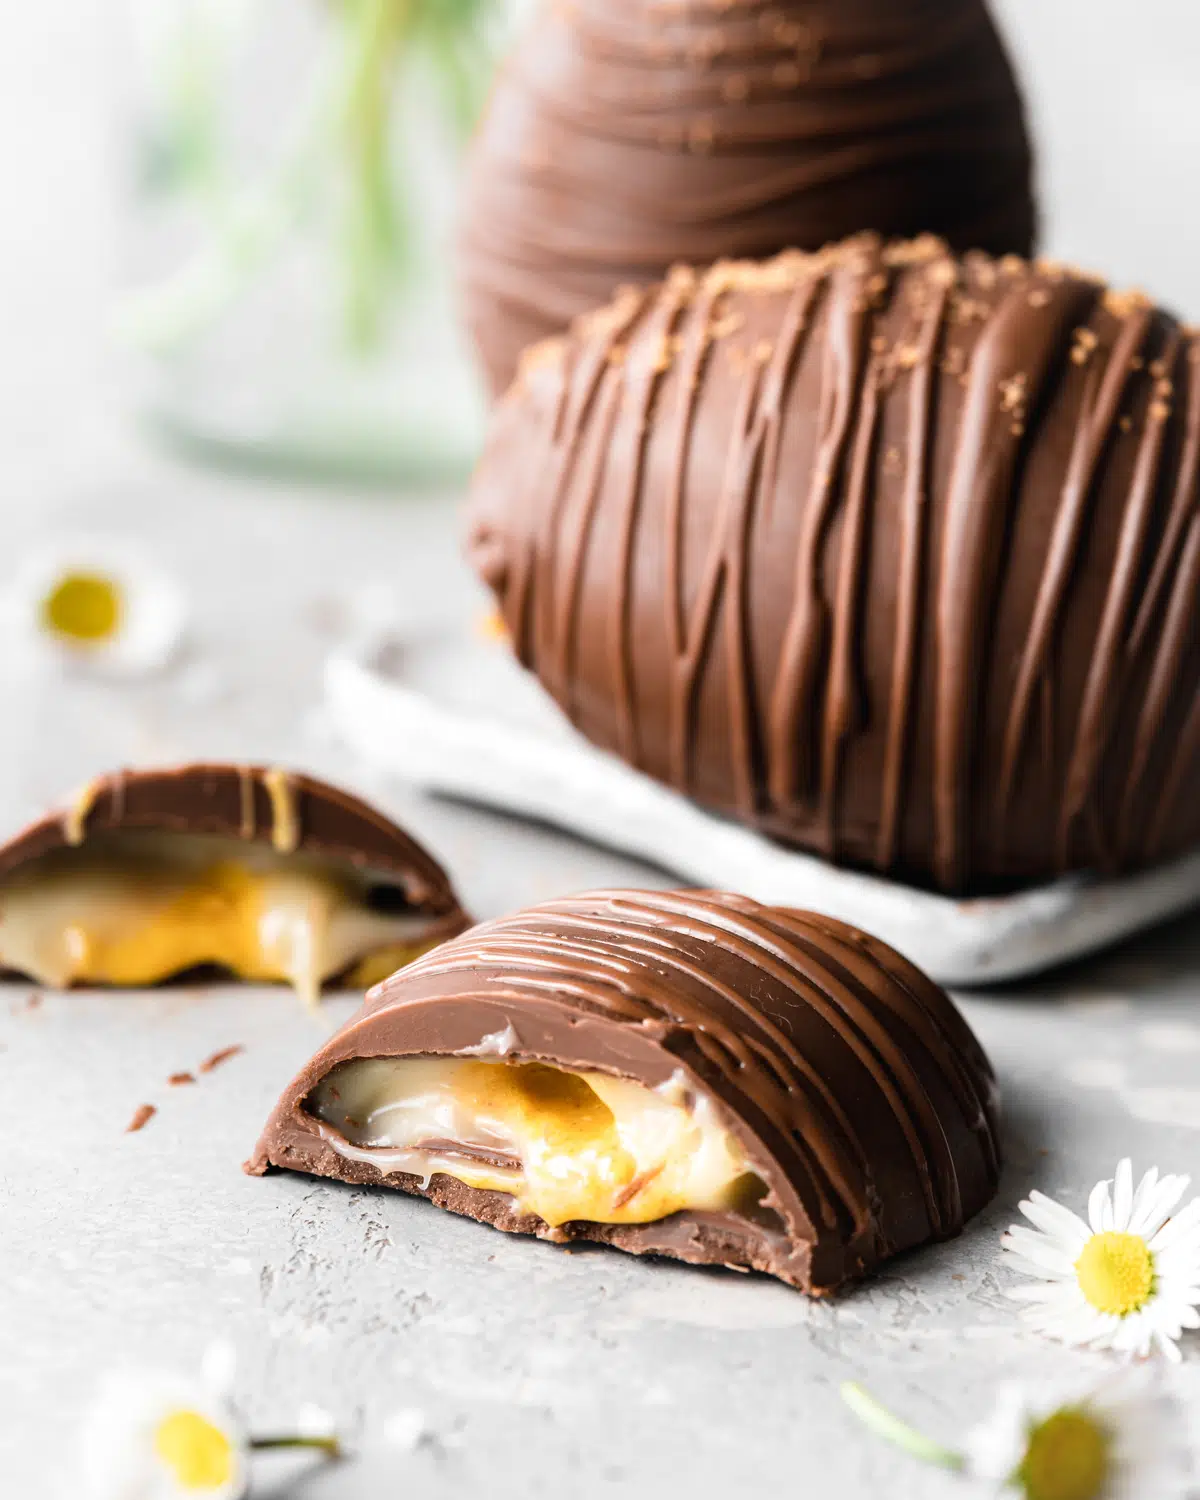 giant creme egg cut in half with daisies in the foreground.